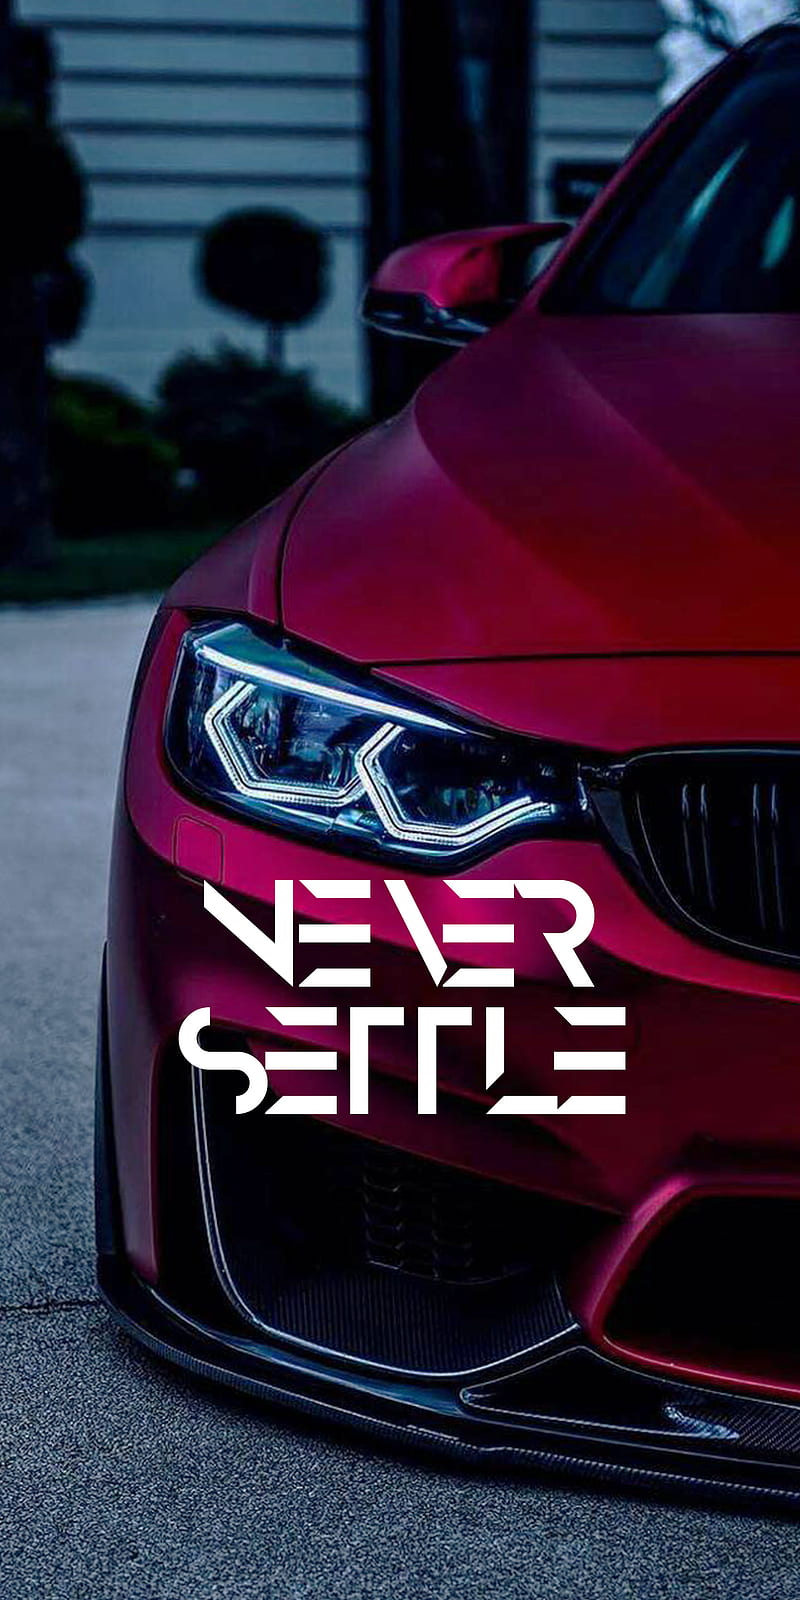 Never settle , carros, iphone, logo, never settle, oneplus, red, theme, HD phone wallpaper